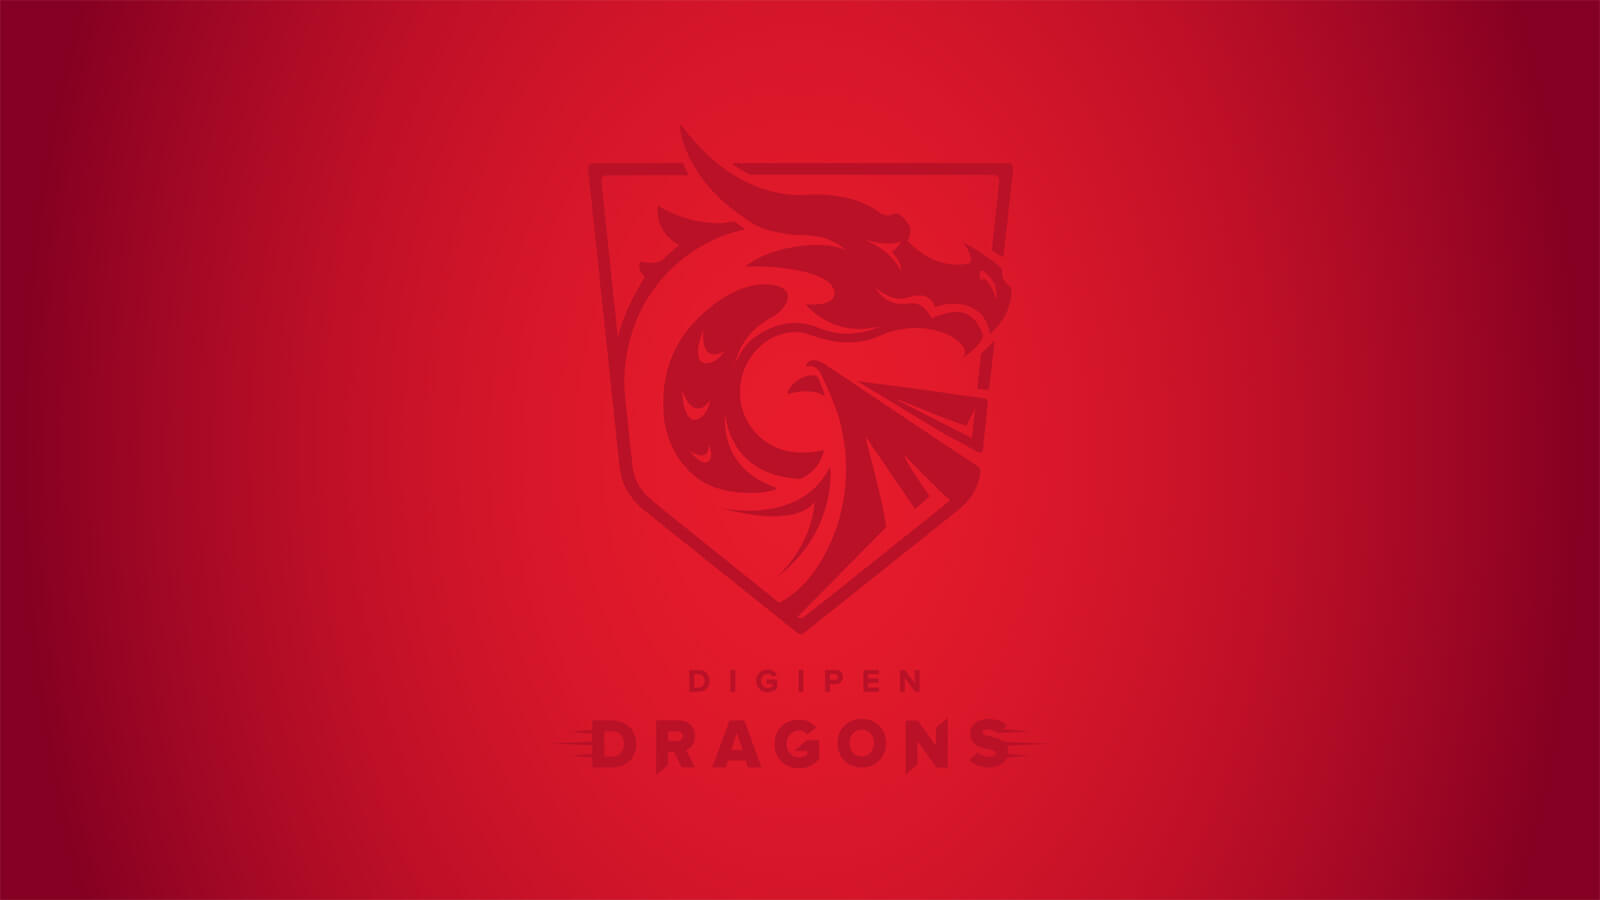 DigiPen Dragon mascot on red background